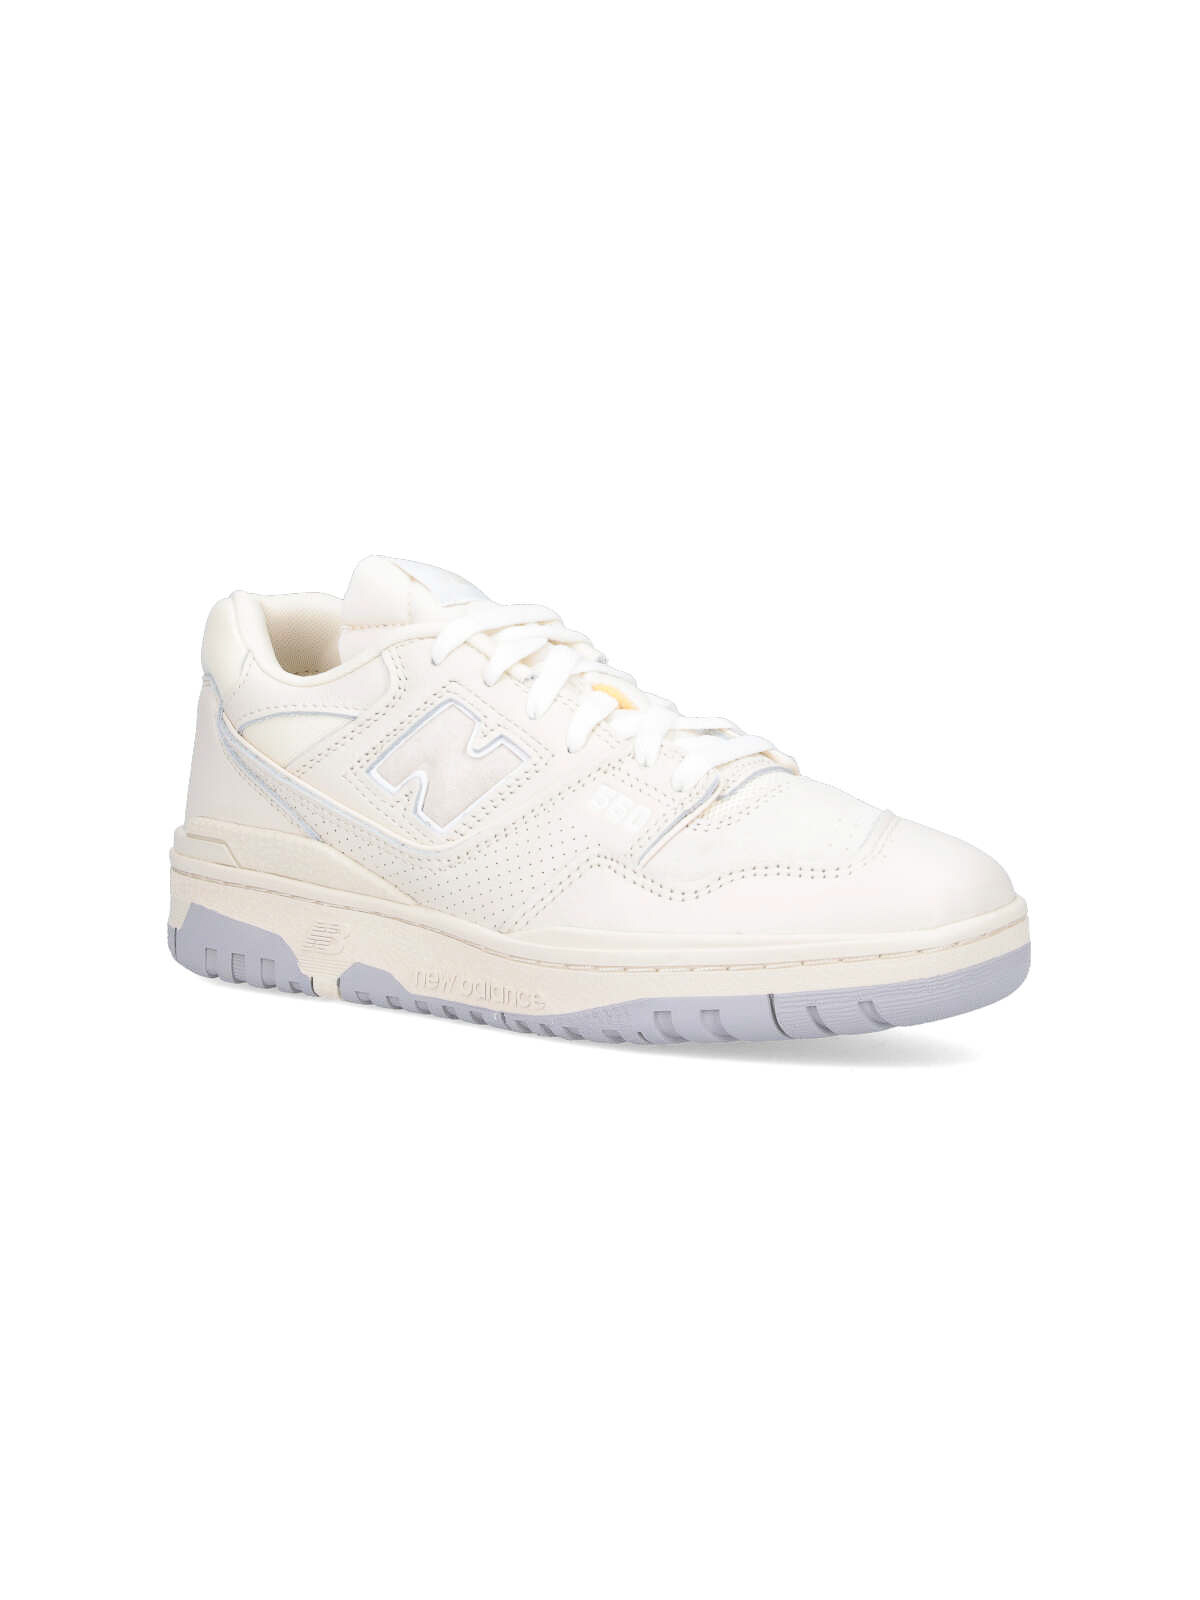 Trainers New Balance - Sneakers - BB550PWD | Shop online at THEBS